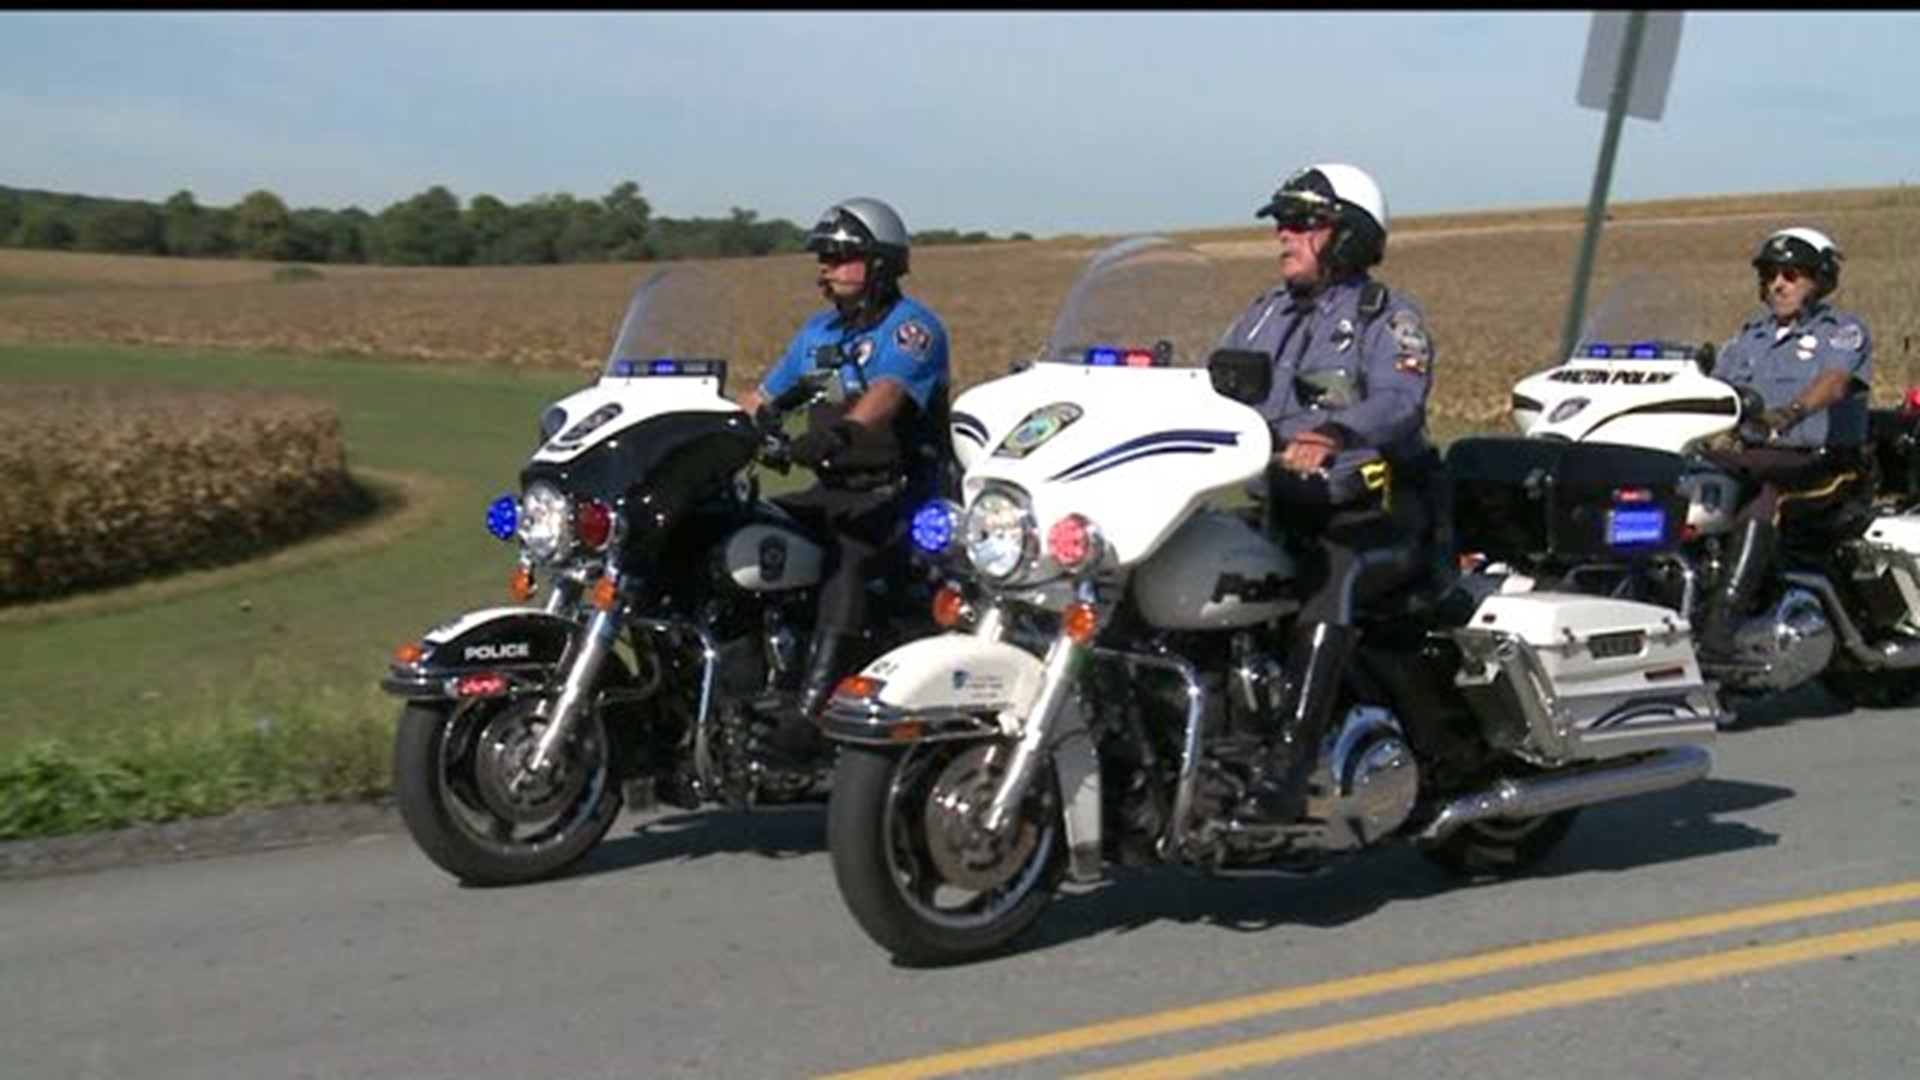 Motorcycle Ride to Remember York County Police Officer